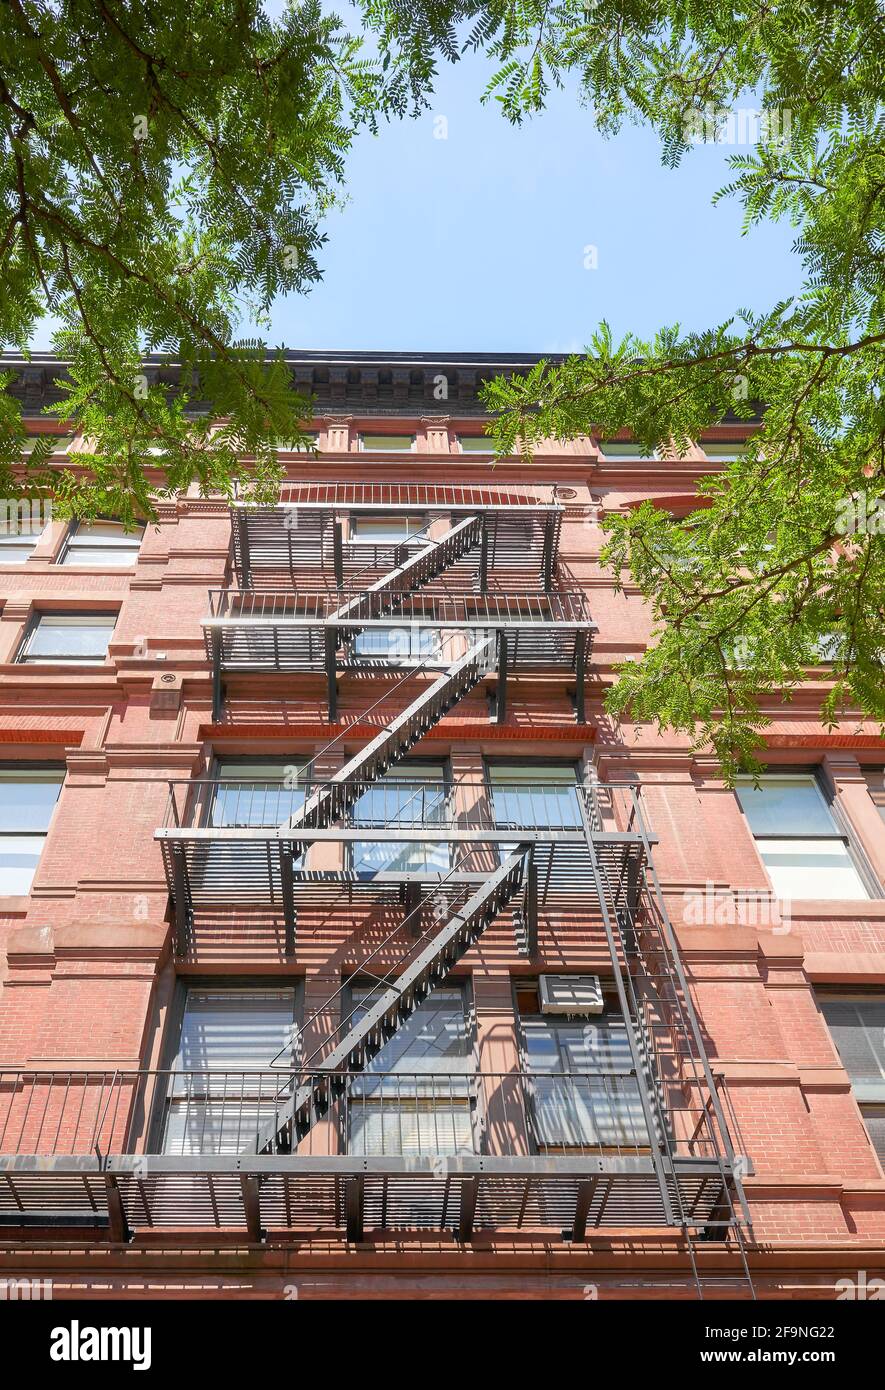 Looking up at an old red brick building with fire escape, New York City, USA. Stock Photo